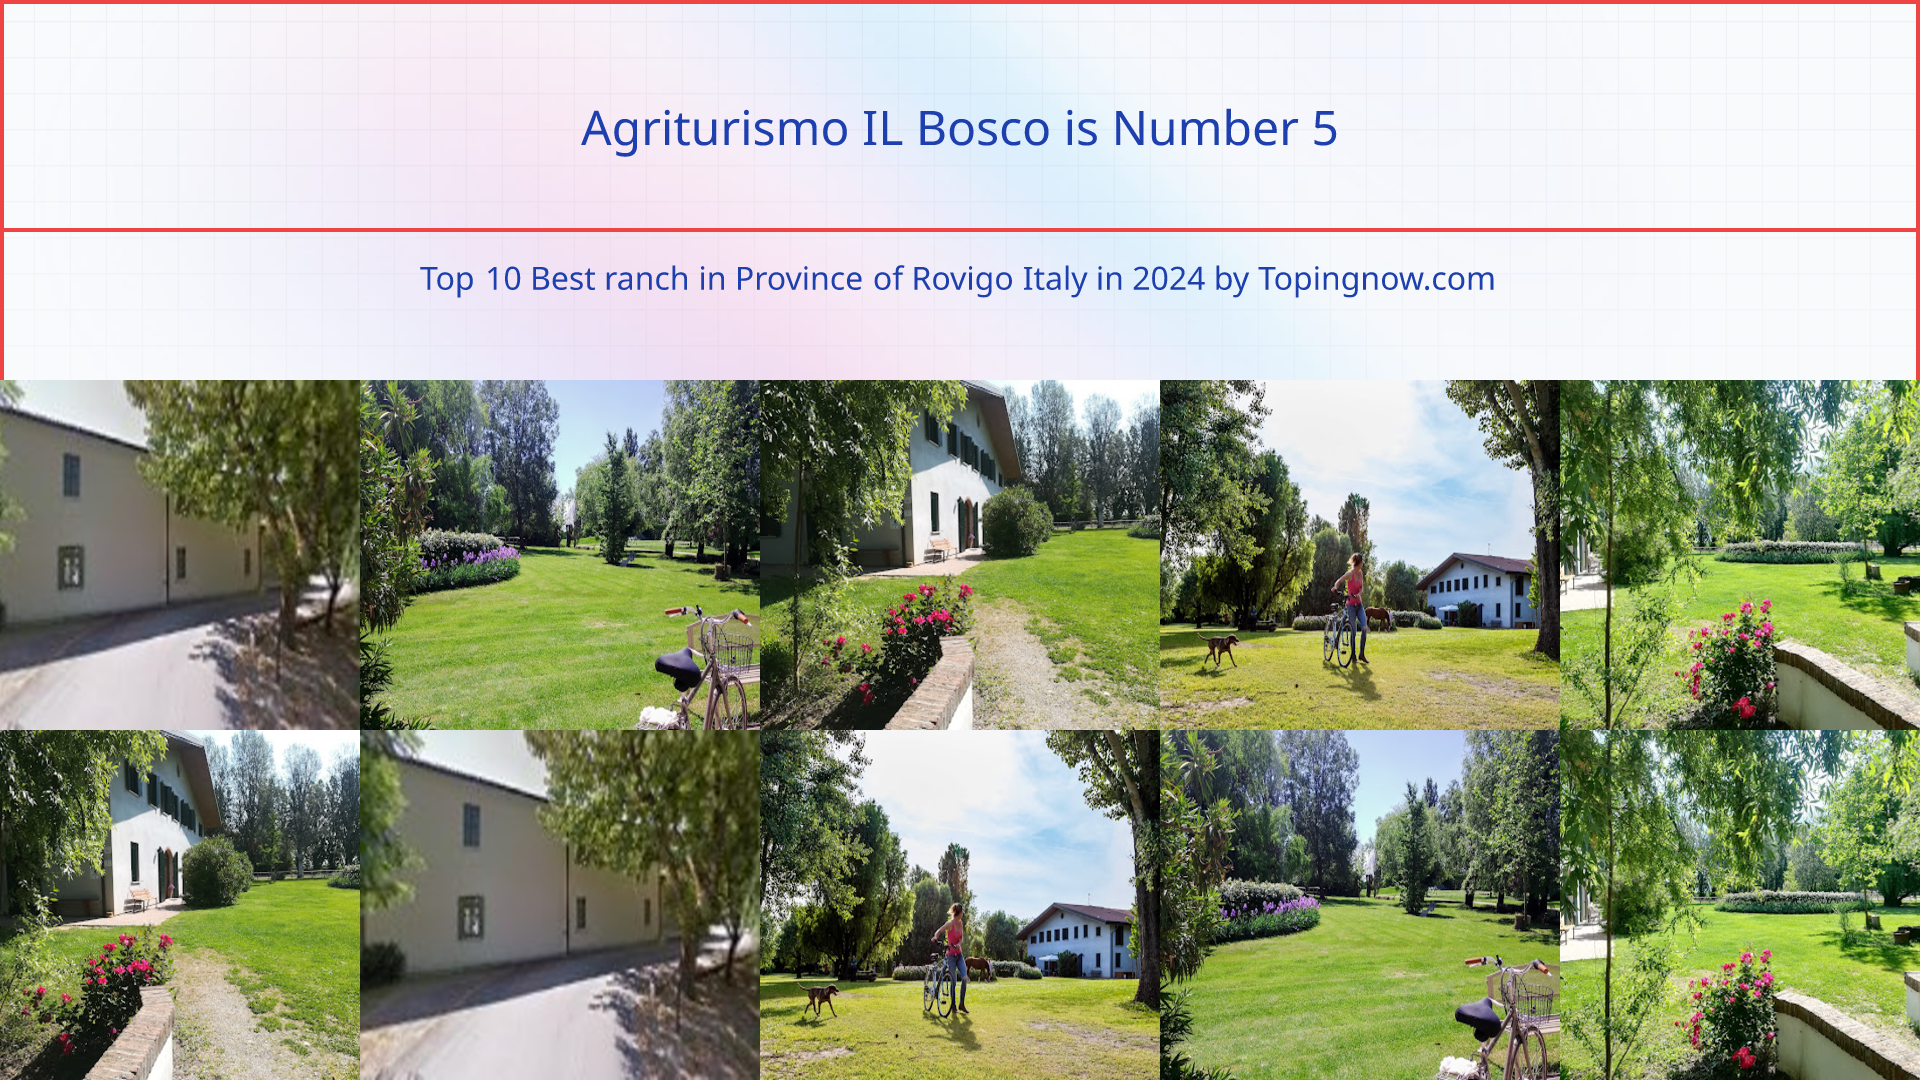 Agriturismo IL Bosco: Top 10 Best ranch in Province of Rovigo Italy in 2024